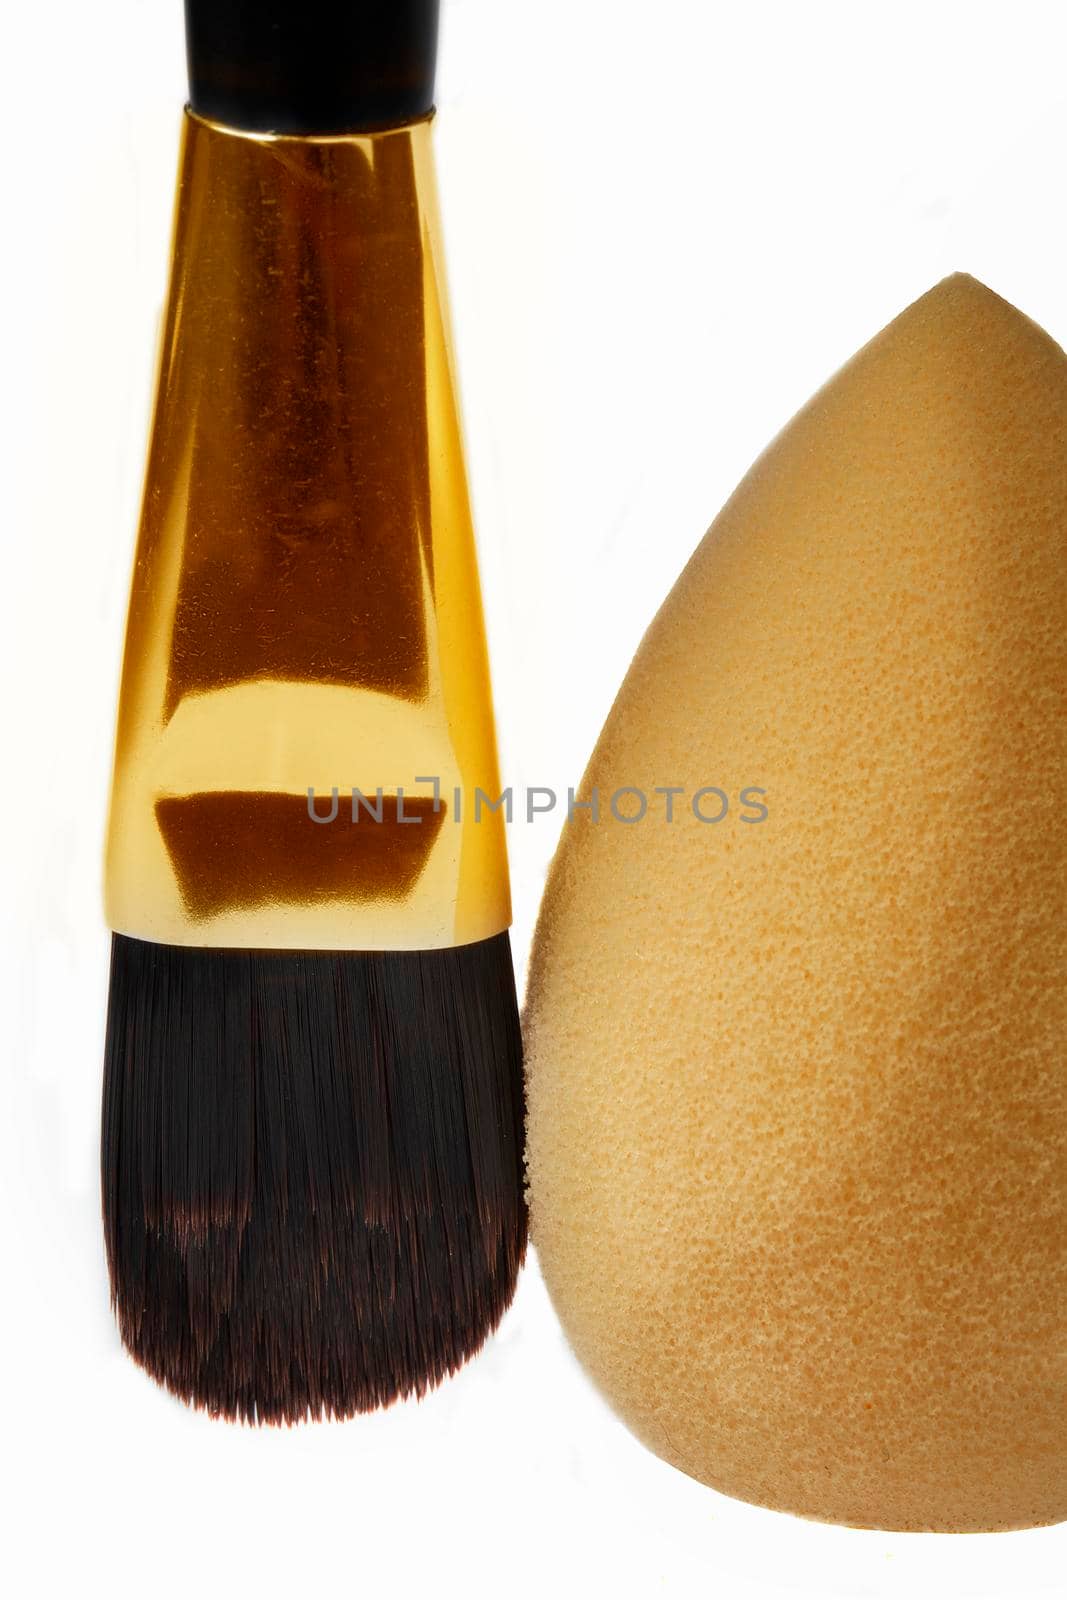 Cosmetic brush and face sponge vertically on a white background. Means for applying cosmetics.